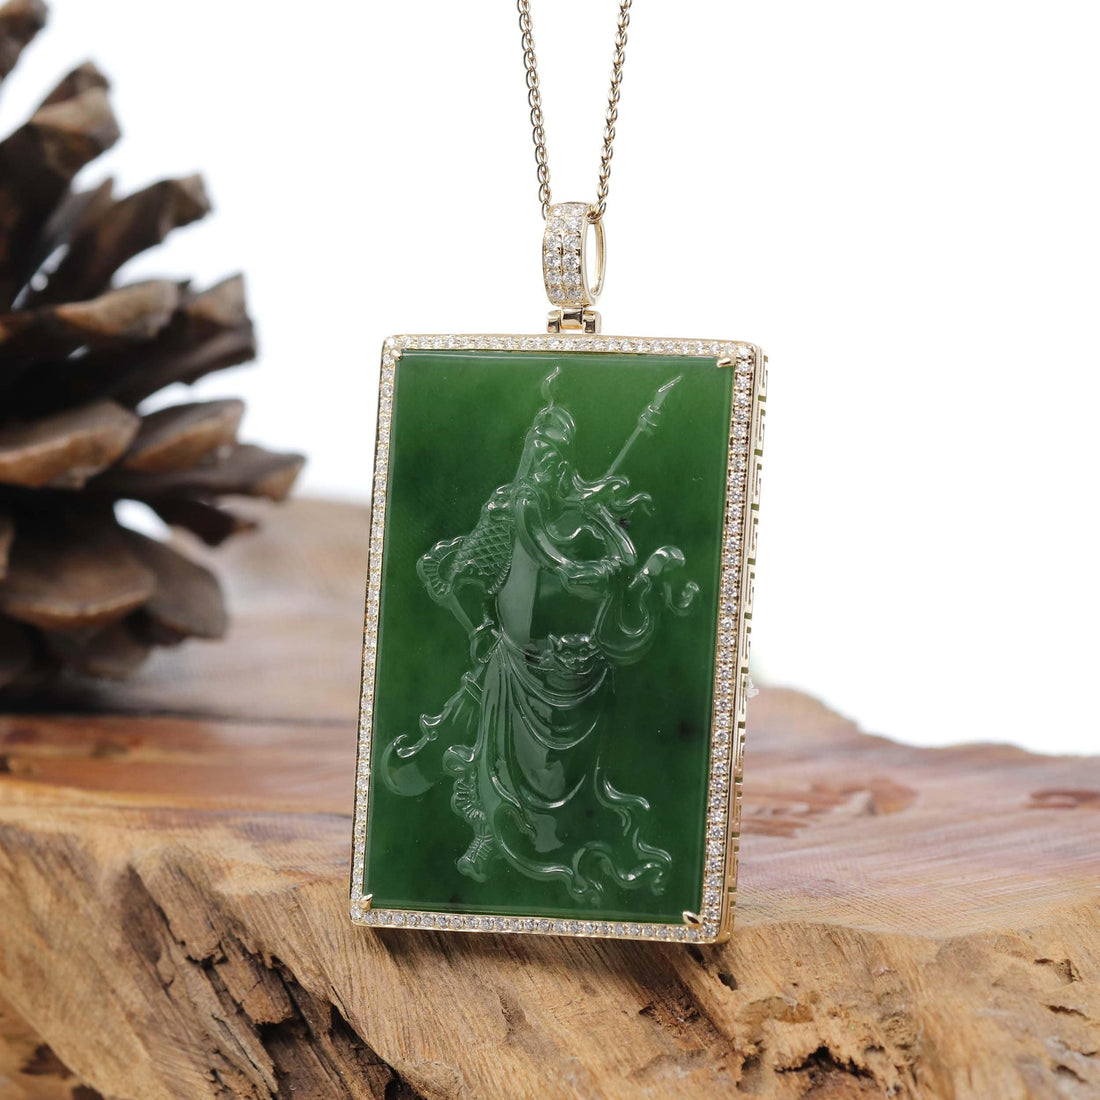 Baikalla Jewelry Gold Jade Buddha Baikalla™ "Guangong" Large 14k Yellow Gold Genuine Apple Green Nephrite Jade with VS1 Diamonds Pendant Necklace High-end Collectable